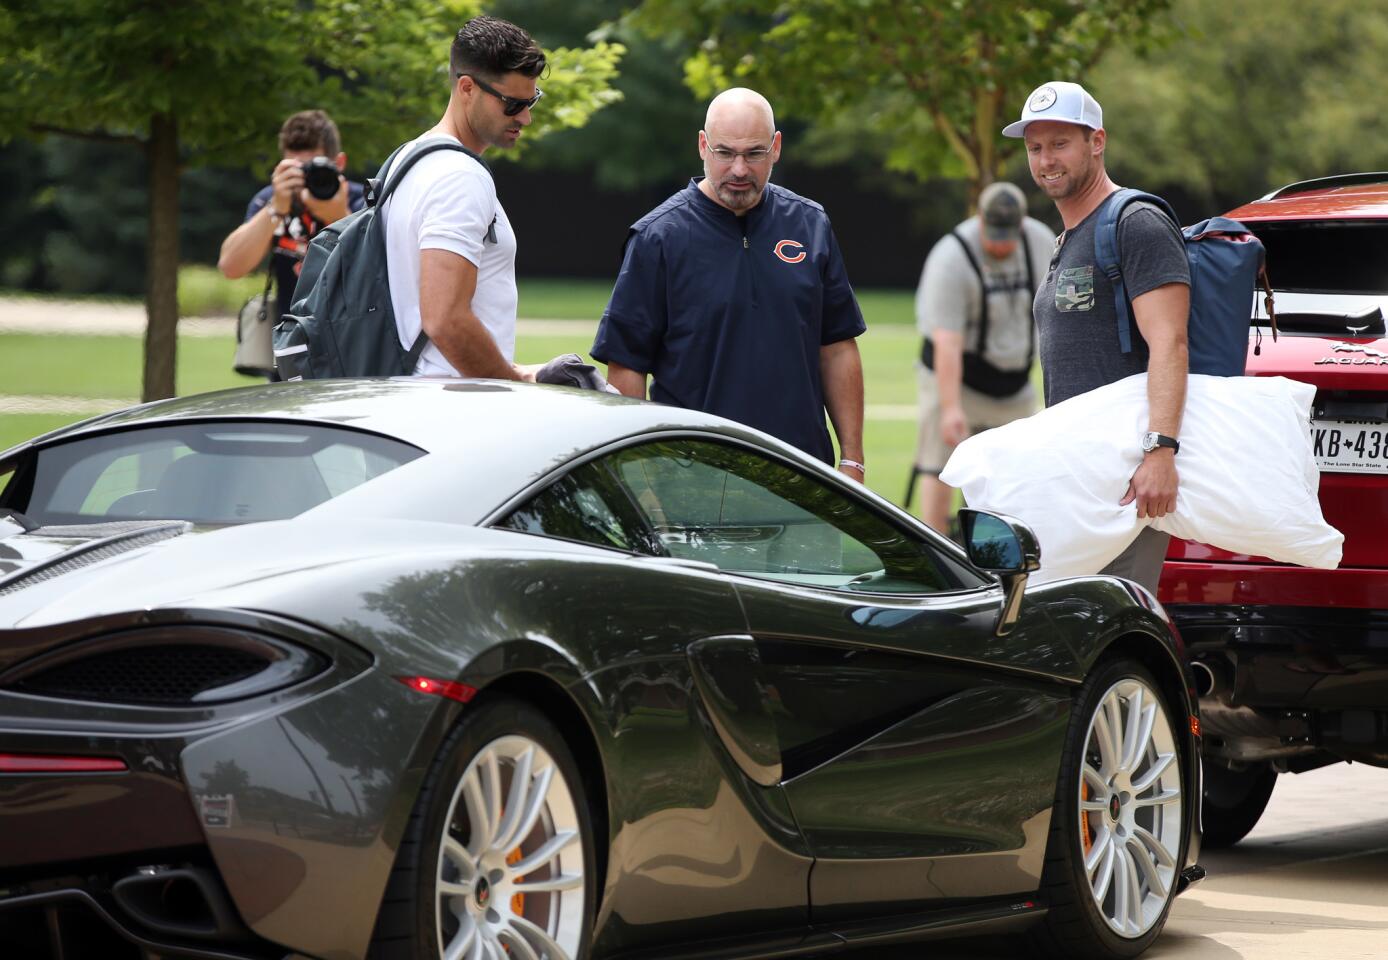 Punter Pat O'Donnell and kicker Connor Barth arrive in a McLaren as the Bears report to training camp in Bourbonnais on July 26, 2017.